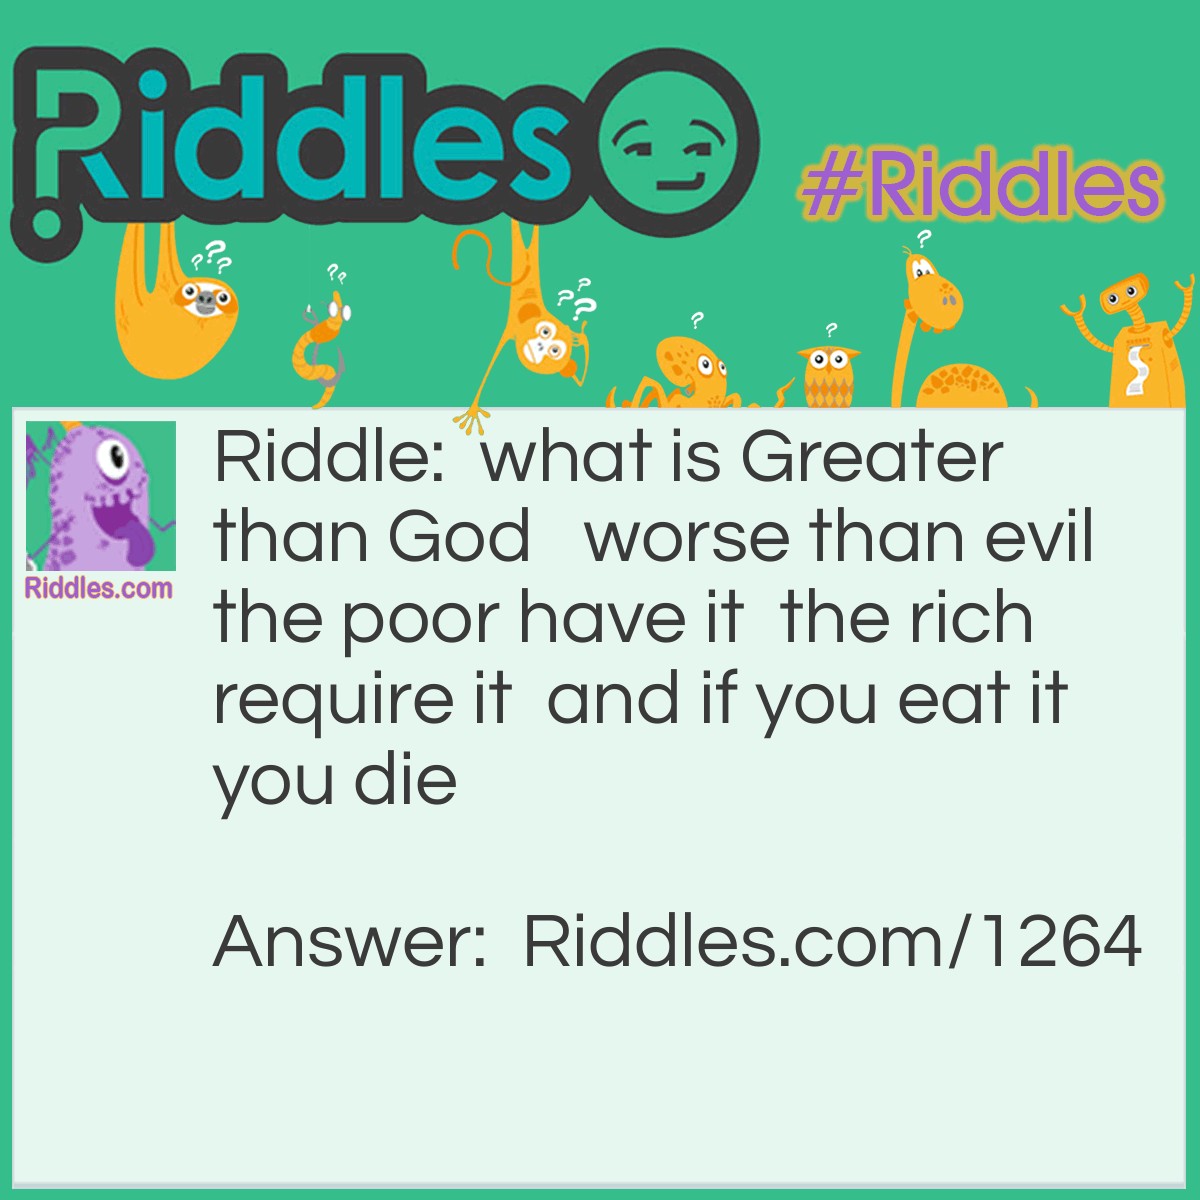 Riddle: What is Greater than God, worse than evil, the poor have it, the rich require it and if you eat it you die? Answer: Nothing. Nothing is better than God. Nothing is worse than evil. The poor have nothing. The rich don't have anything they have everything. If you eat nothing you die.